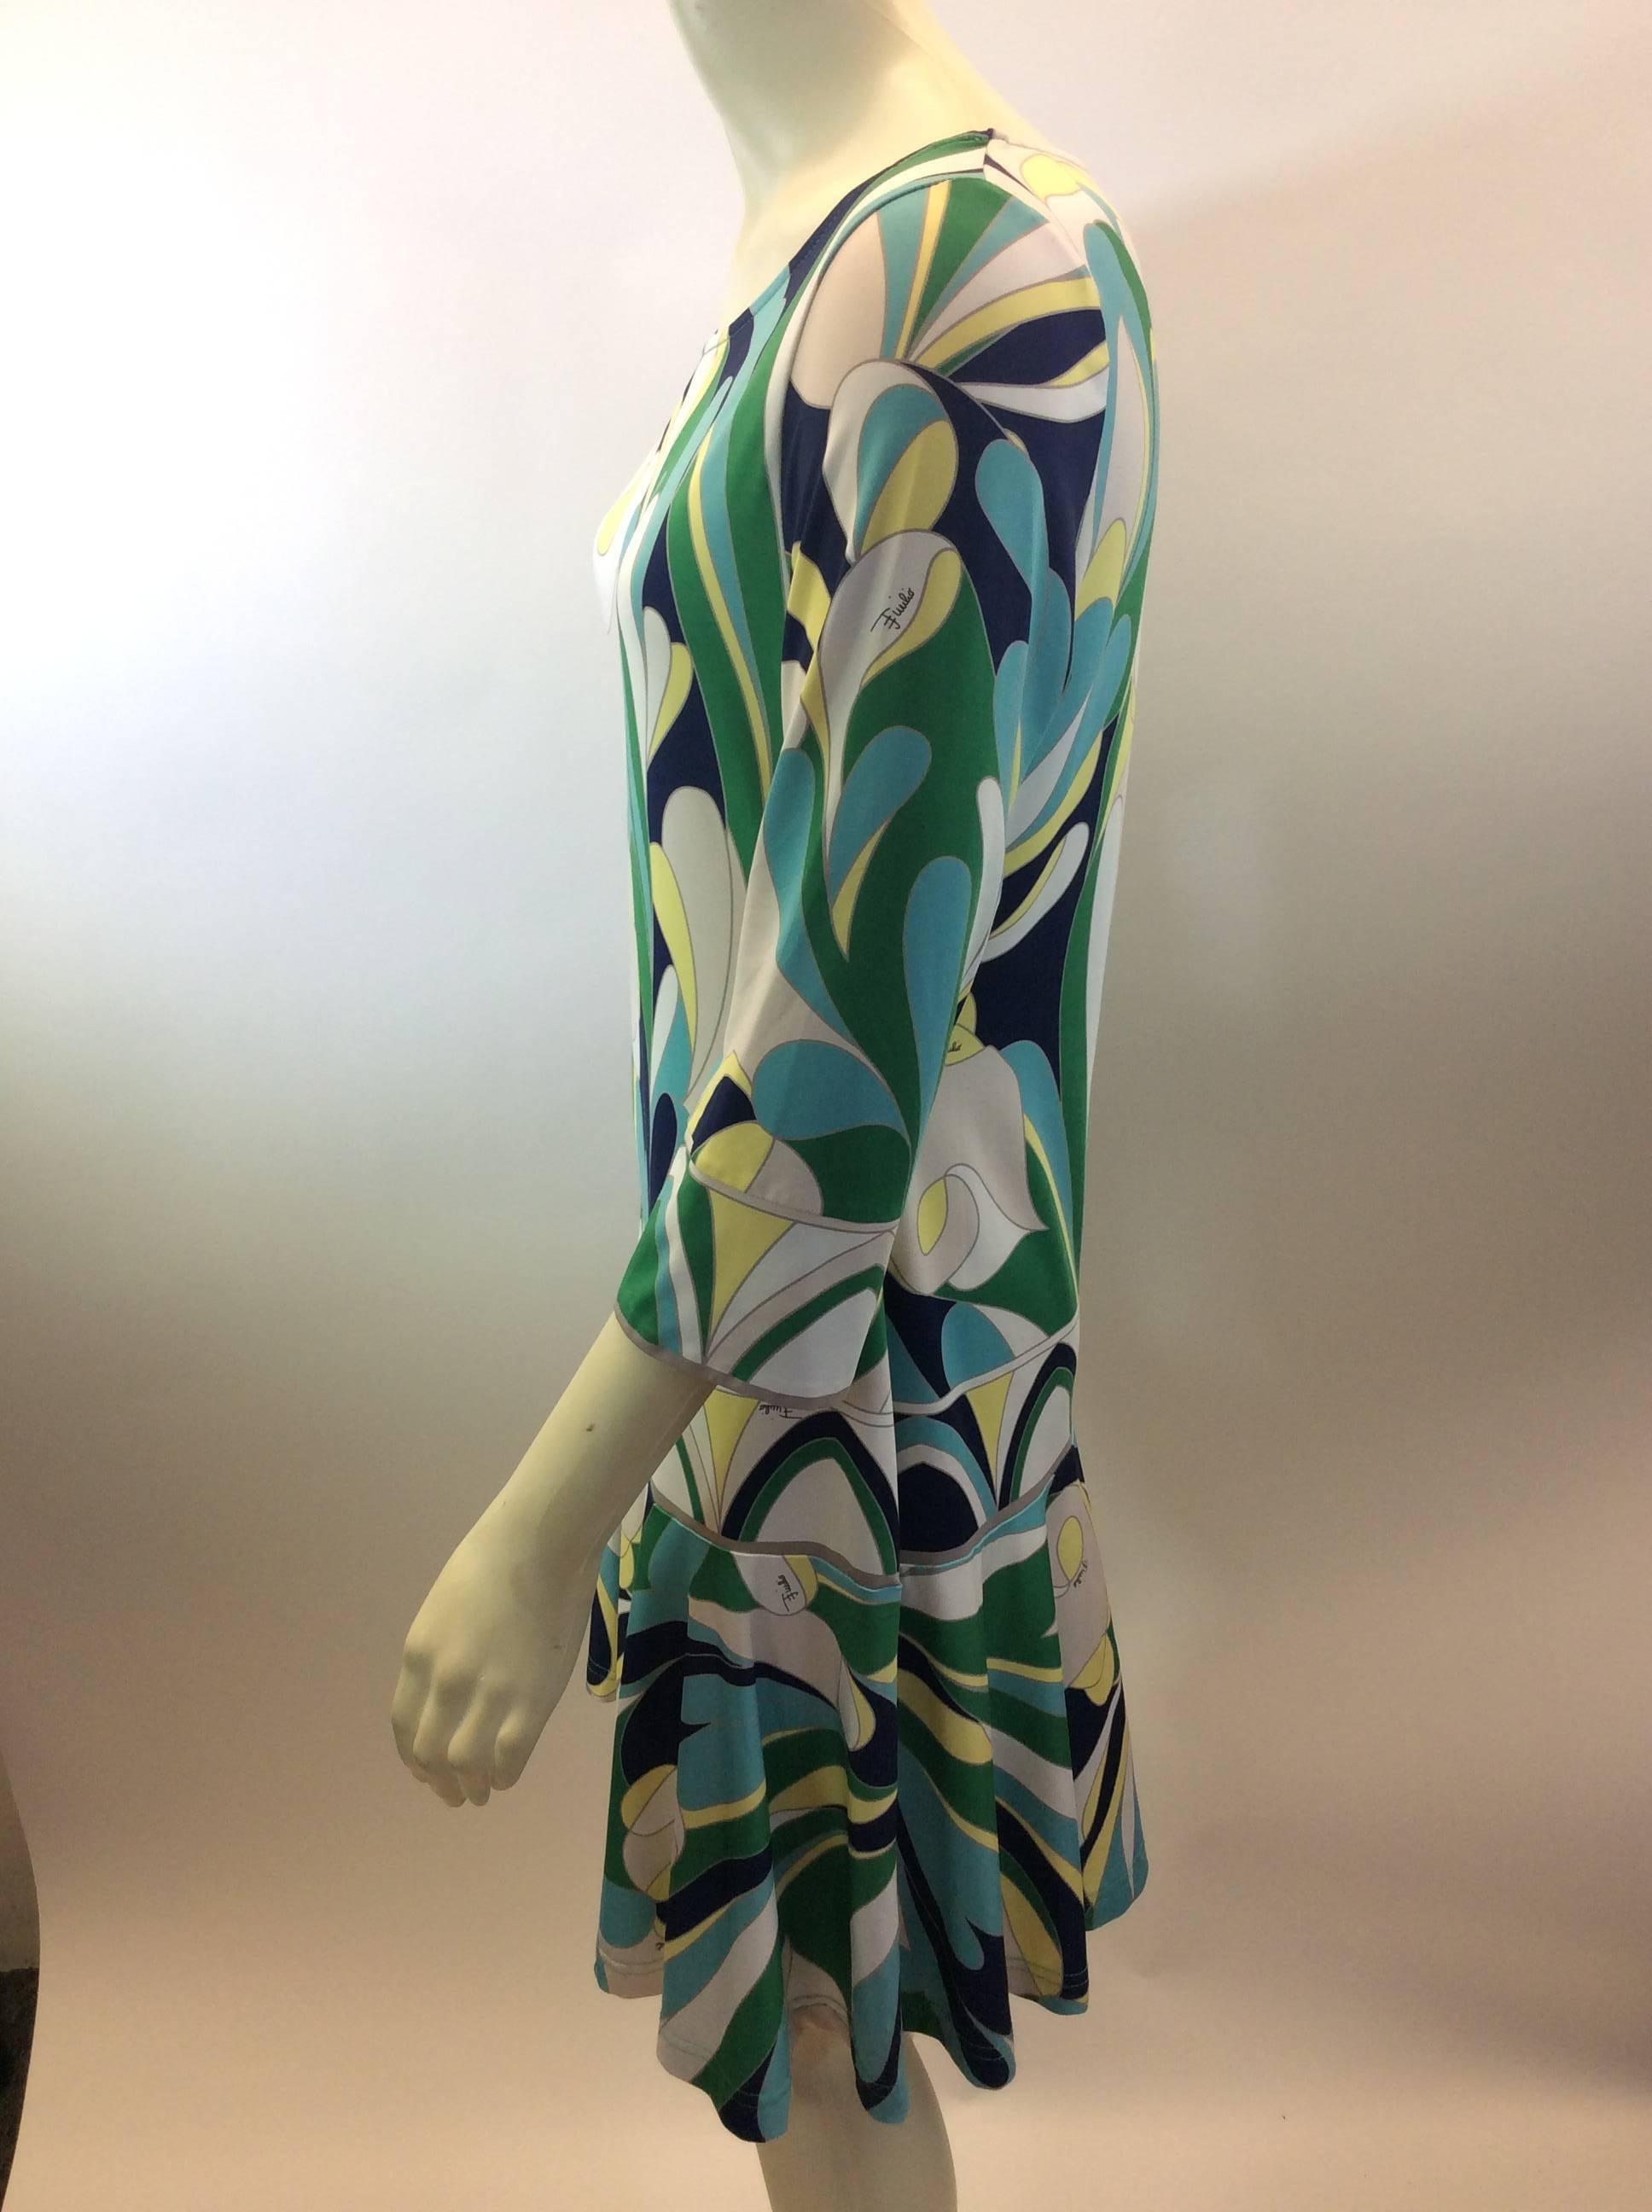 Emilio Pucci Green and Blue Print Silk Dress
$250
Made in Italy
100% Silk
Size 40
Length 35